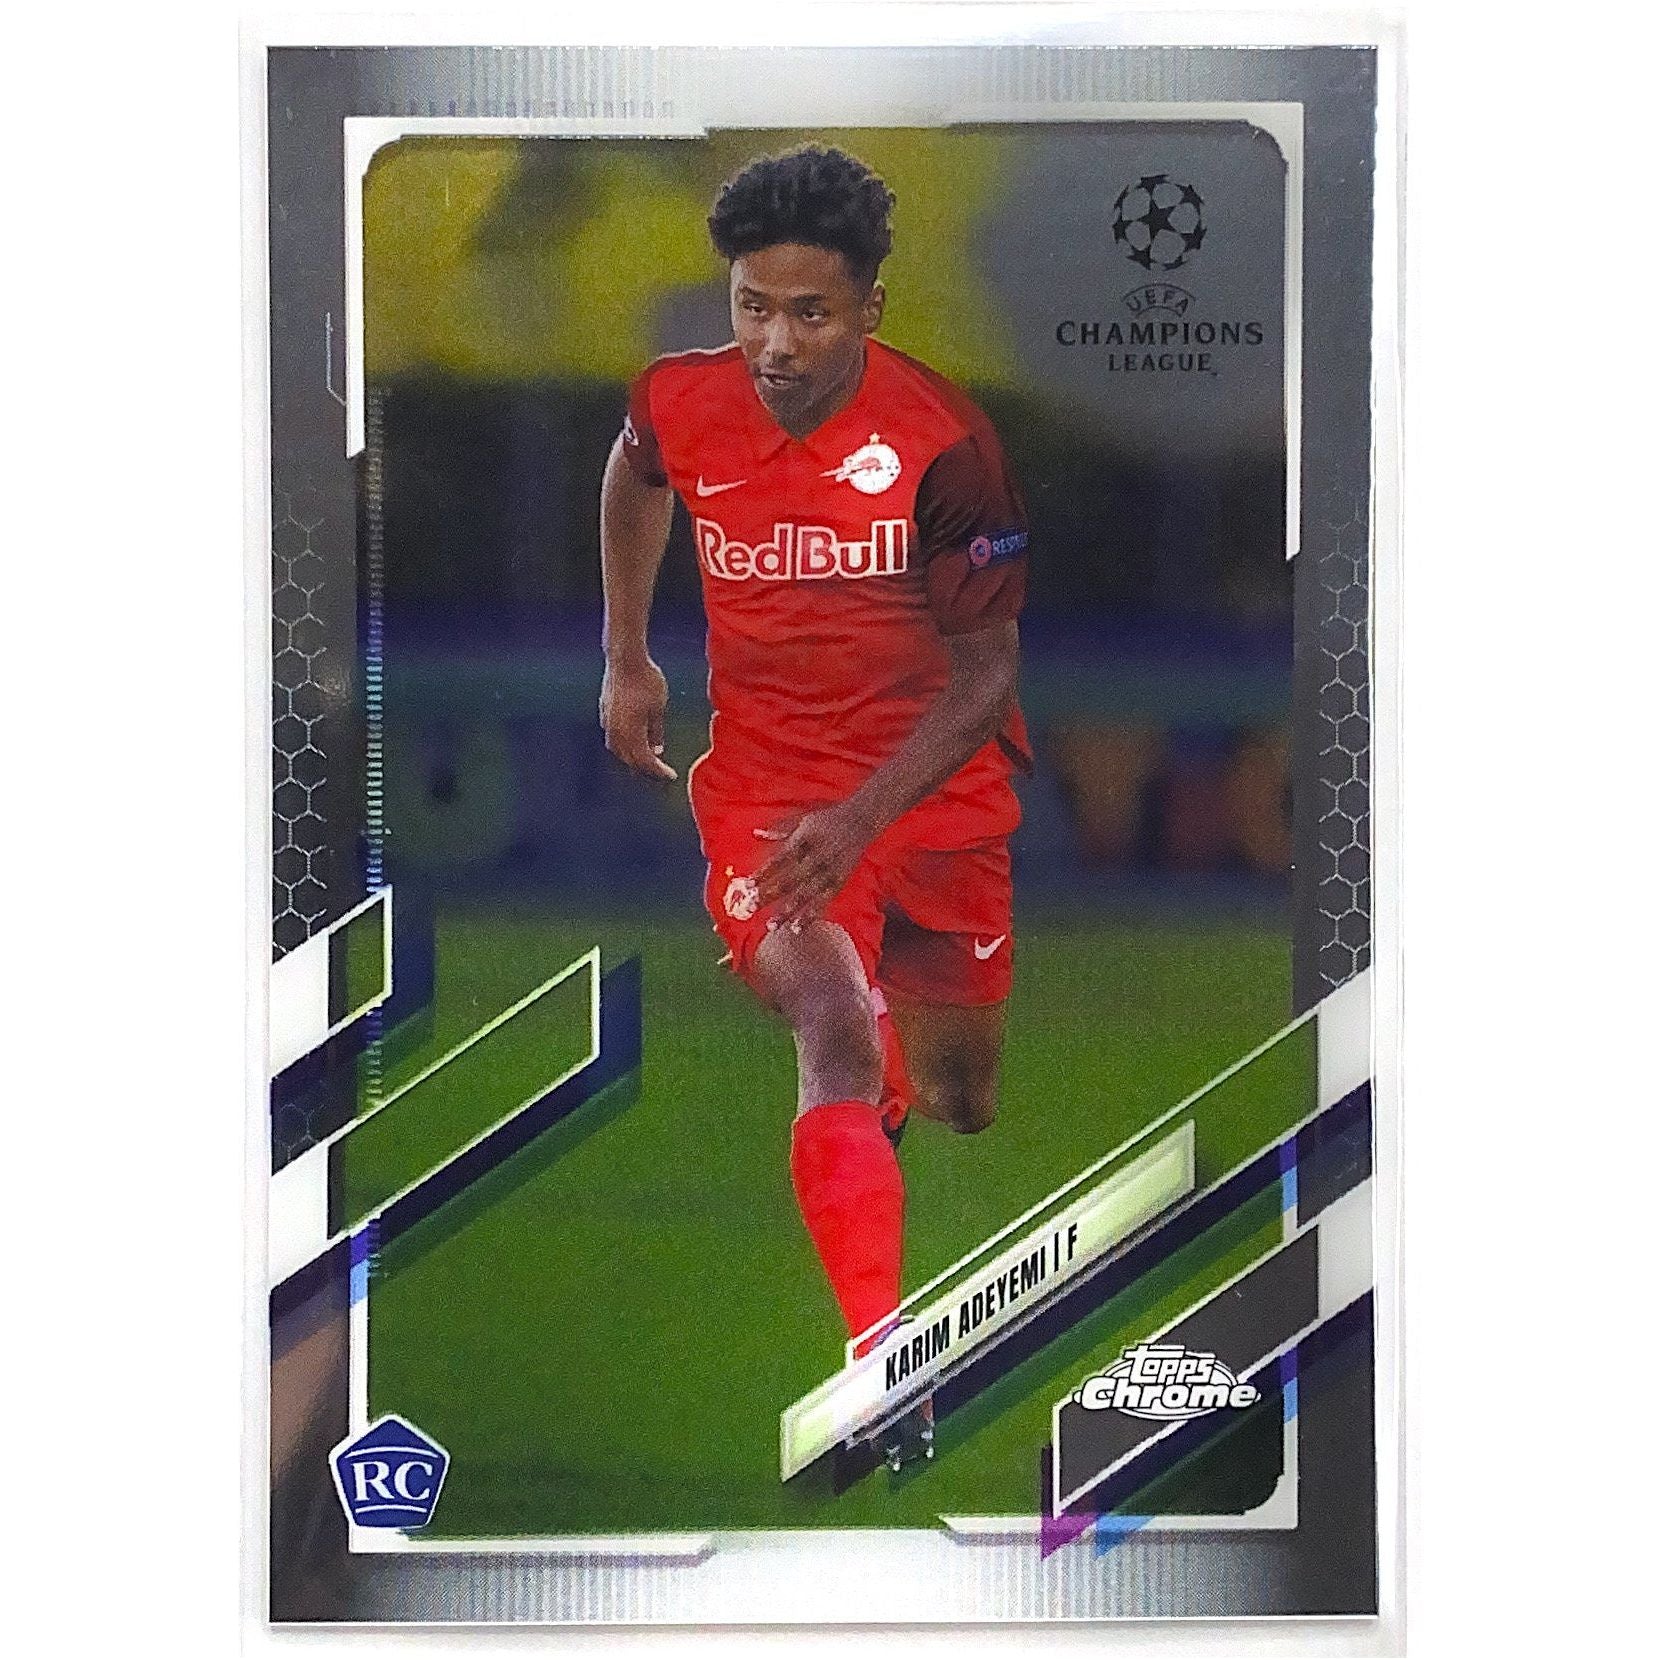  2021 Topps Chrome UEFA Champions League Karim Adeyemi Rookie Card  Local Legends Cards & Collectibles